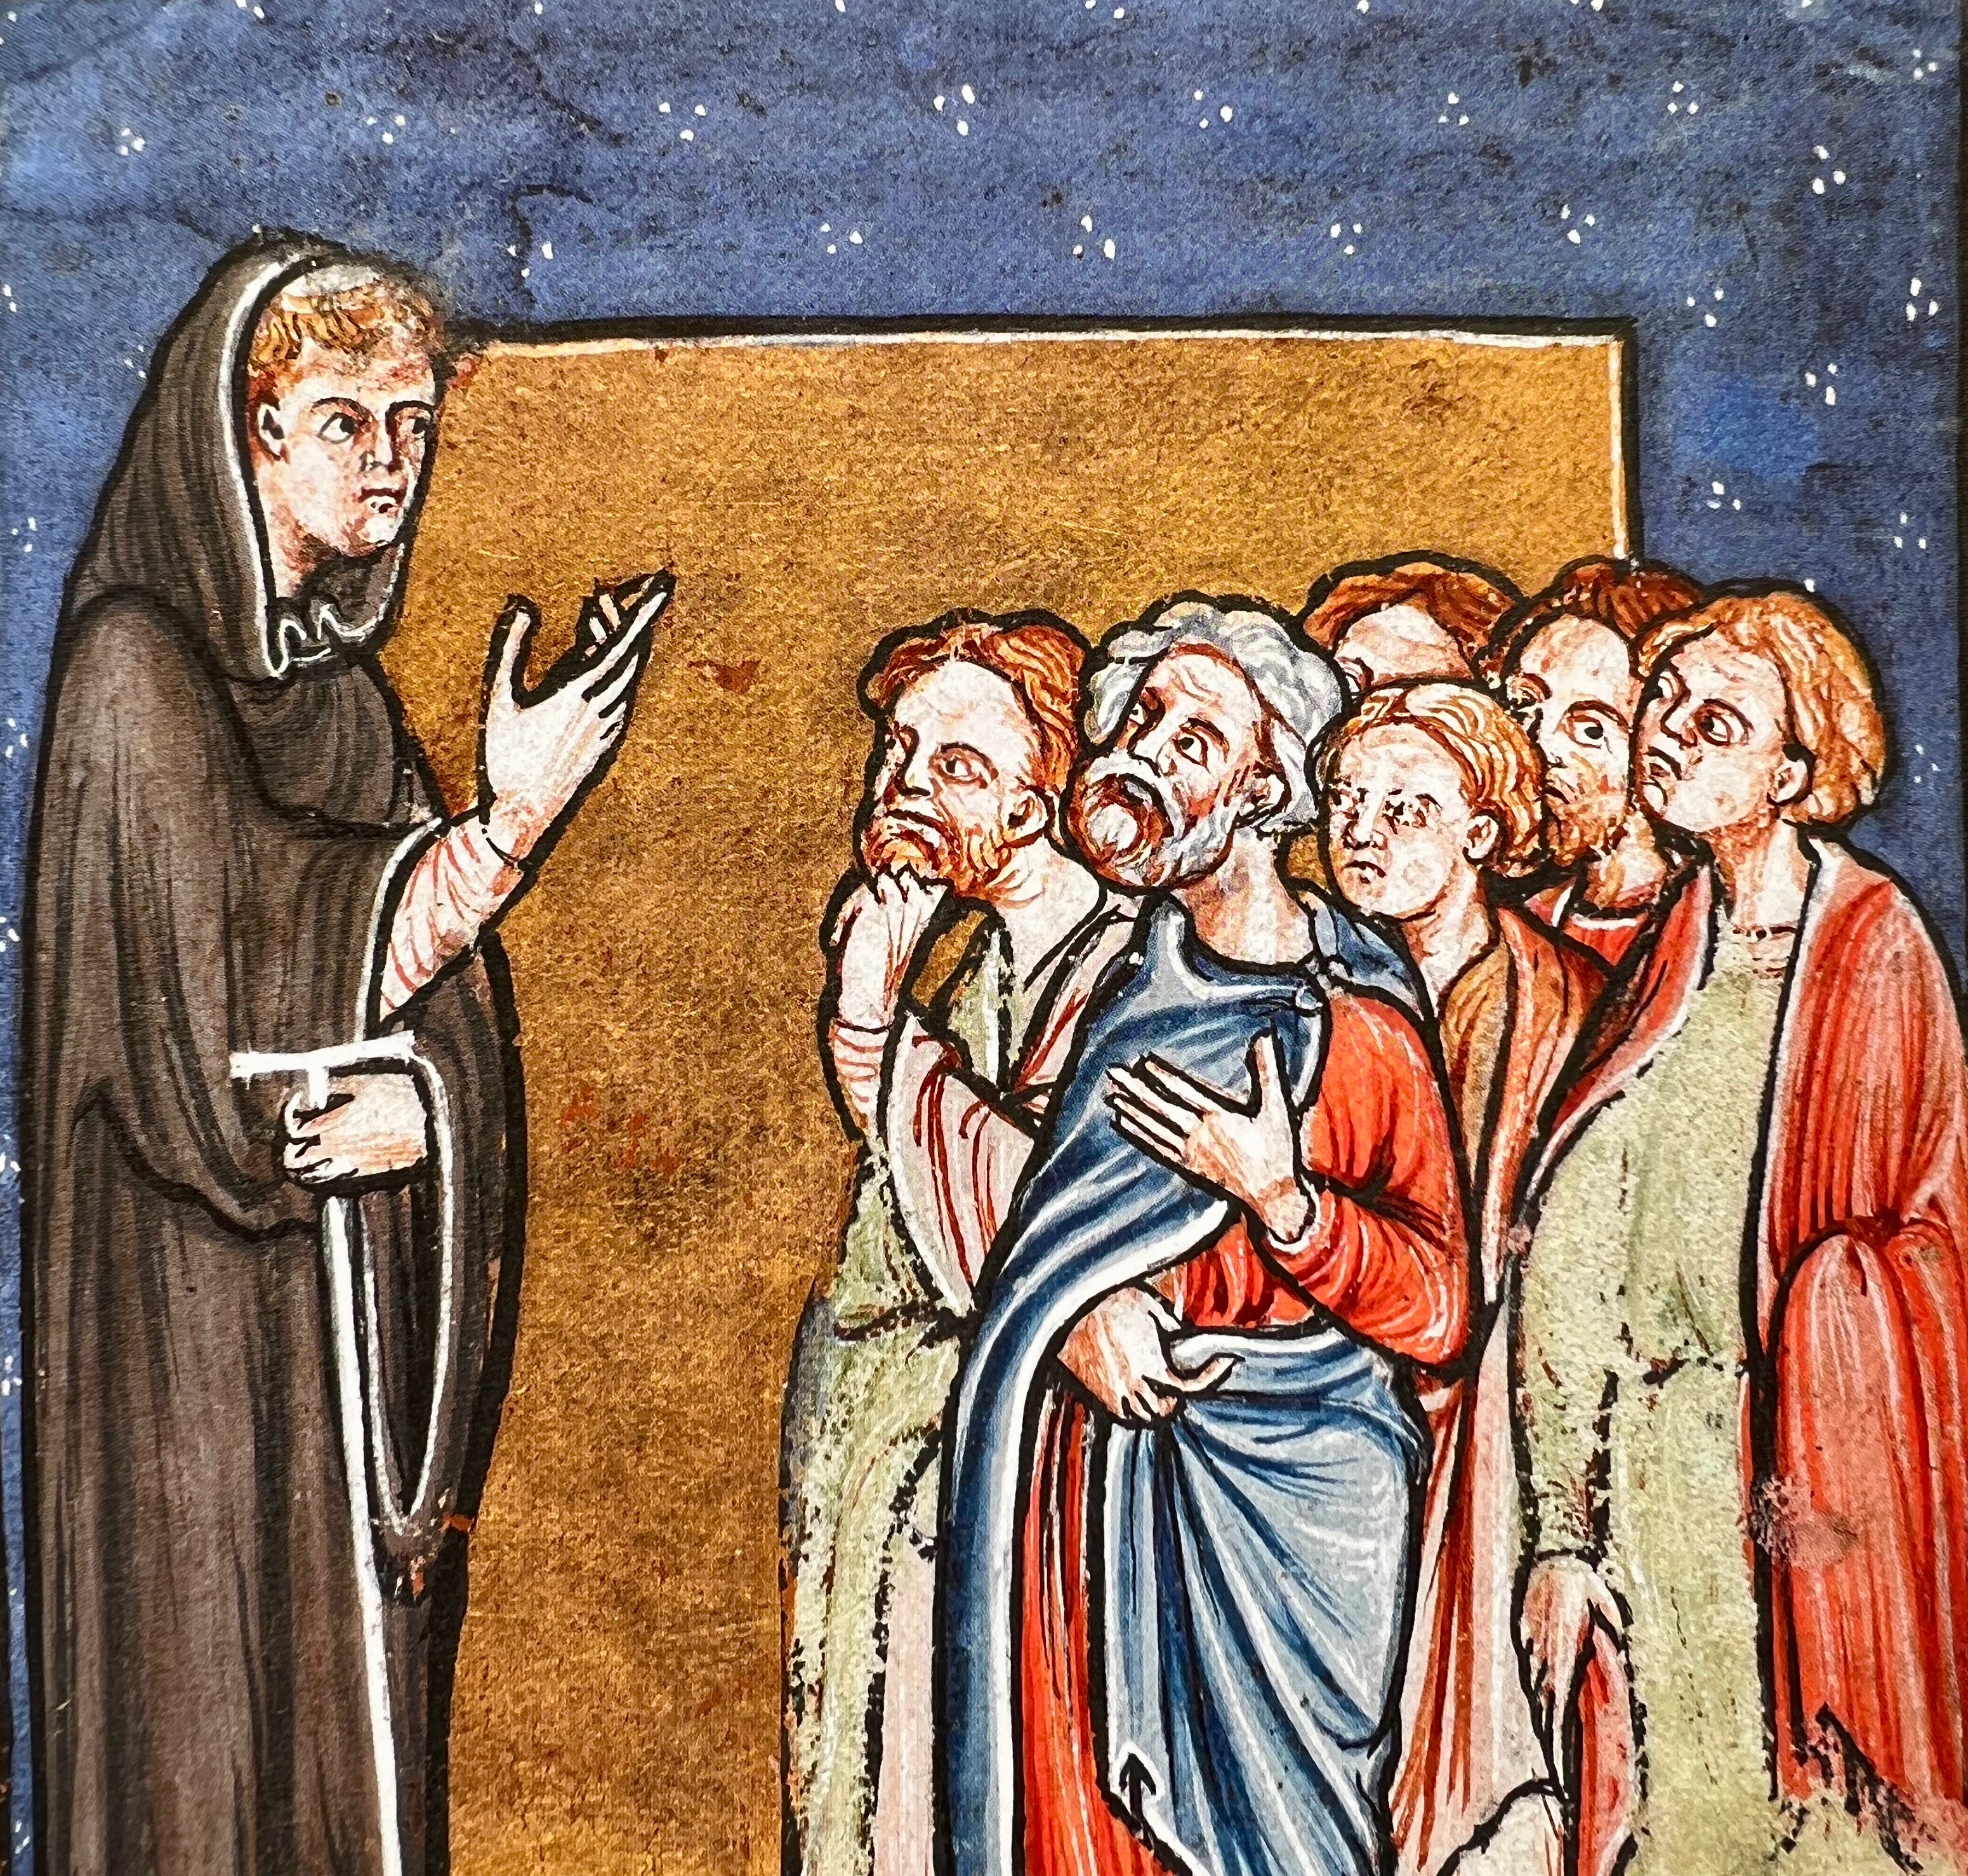 St. Cuthbert delivering a sermon to the Northumbrians